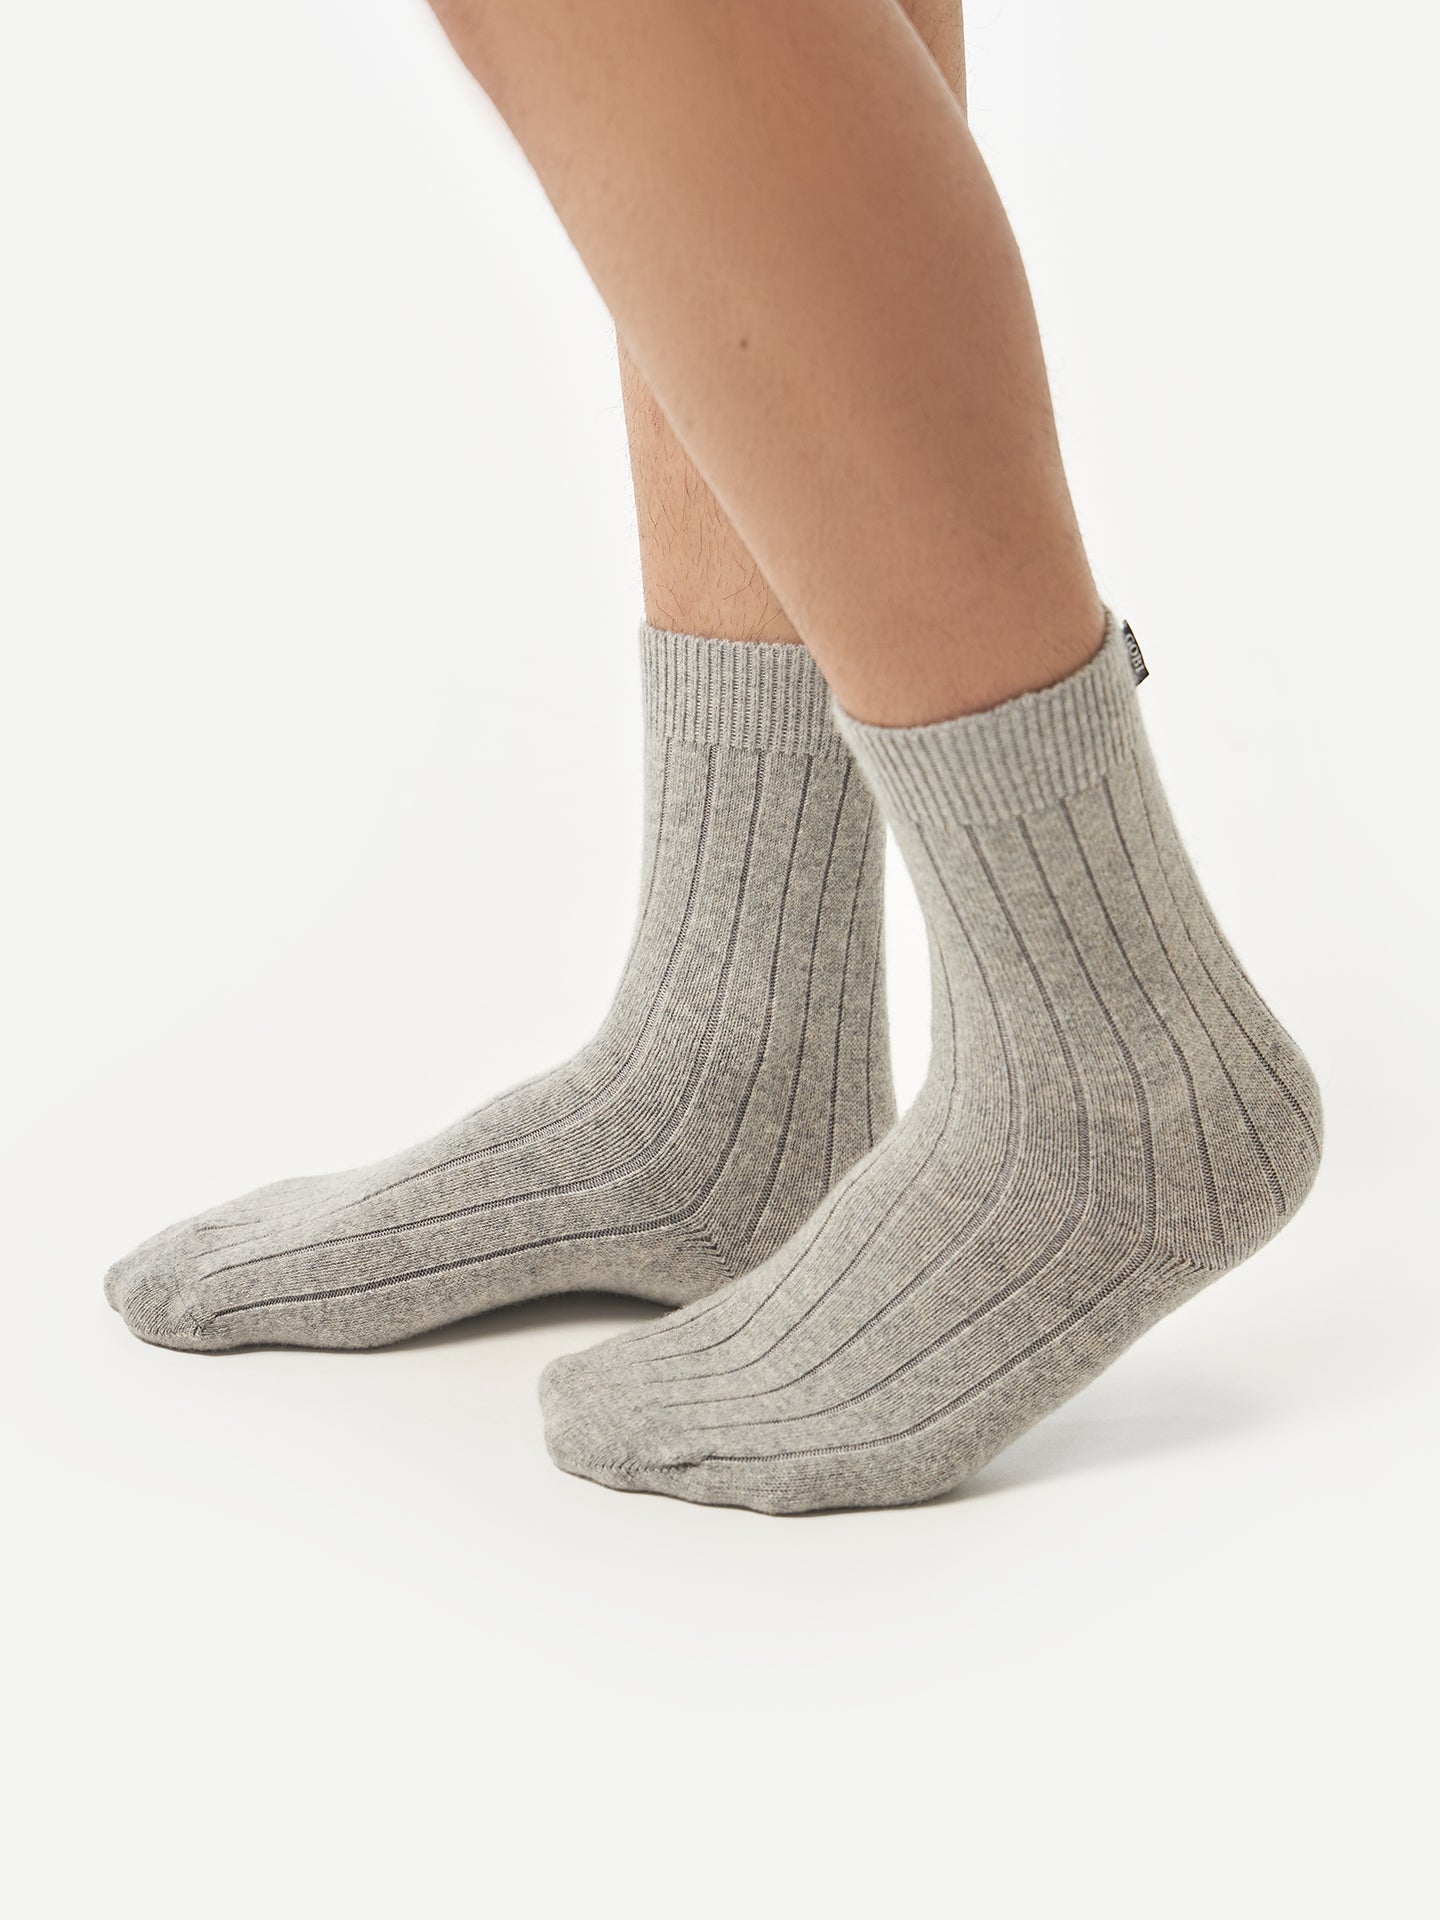 Discover Unmatched Comfort with Cashmere Socks | GOBI Cashmere